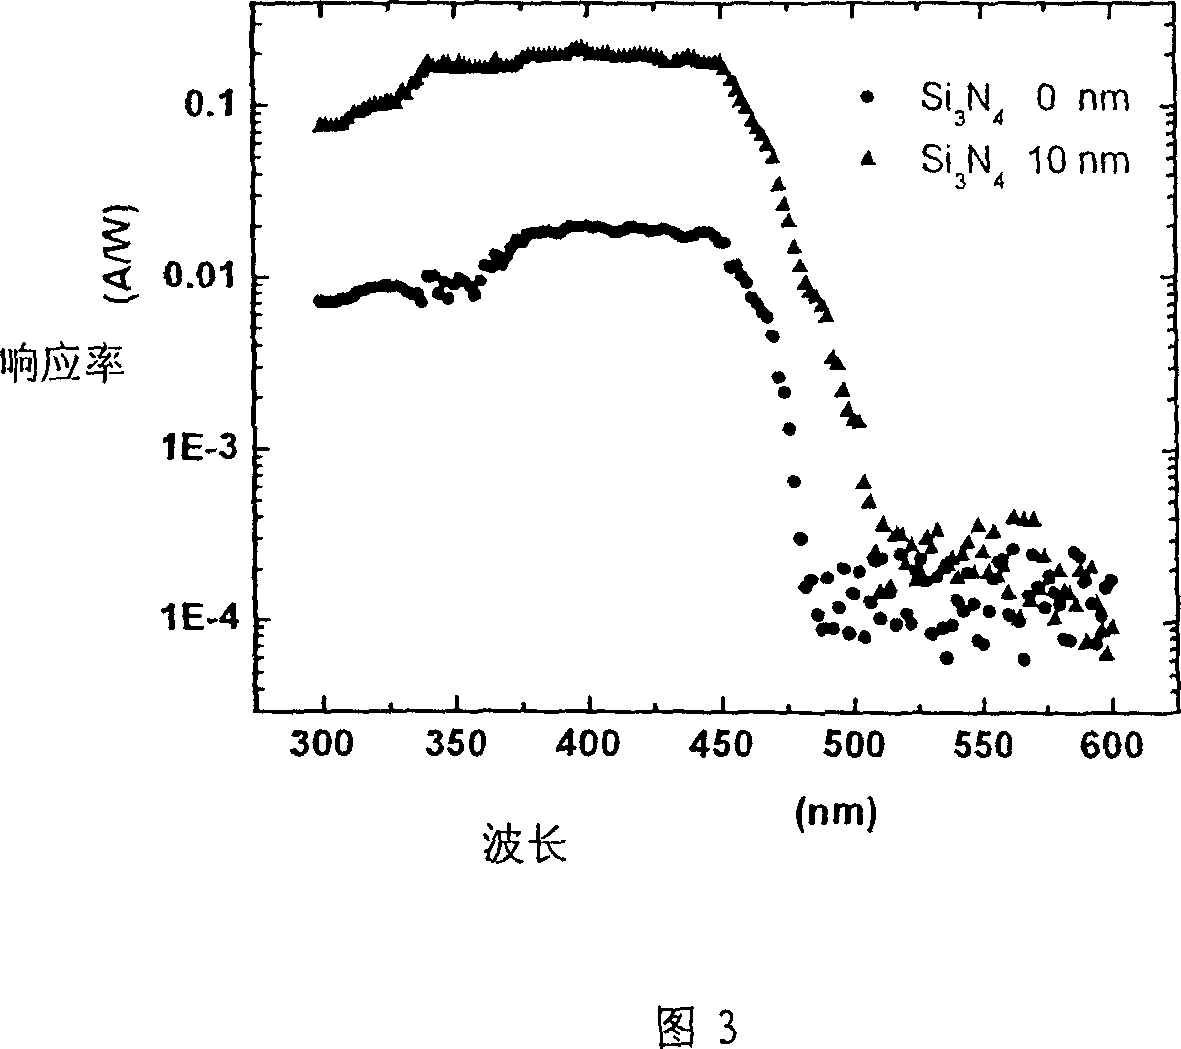 Novel semiconductor material In-Ga-N surface barrier type solar battery and its preparation method